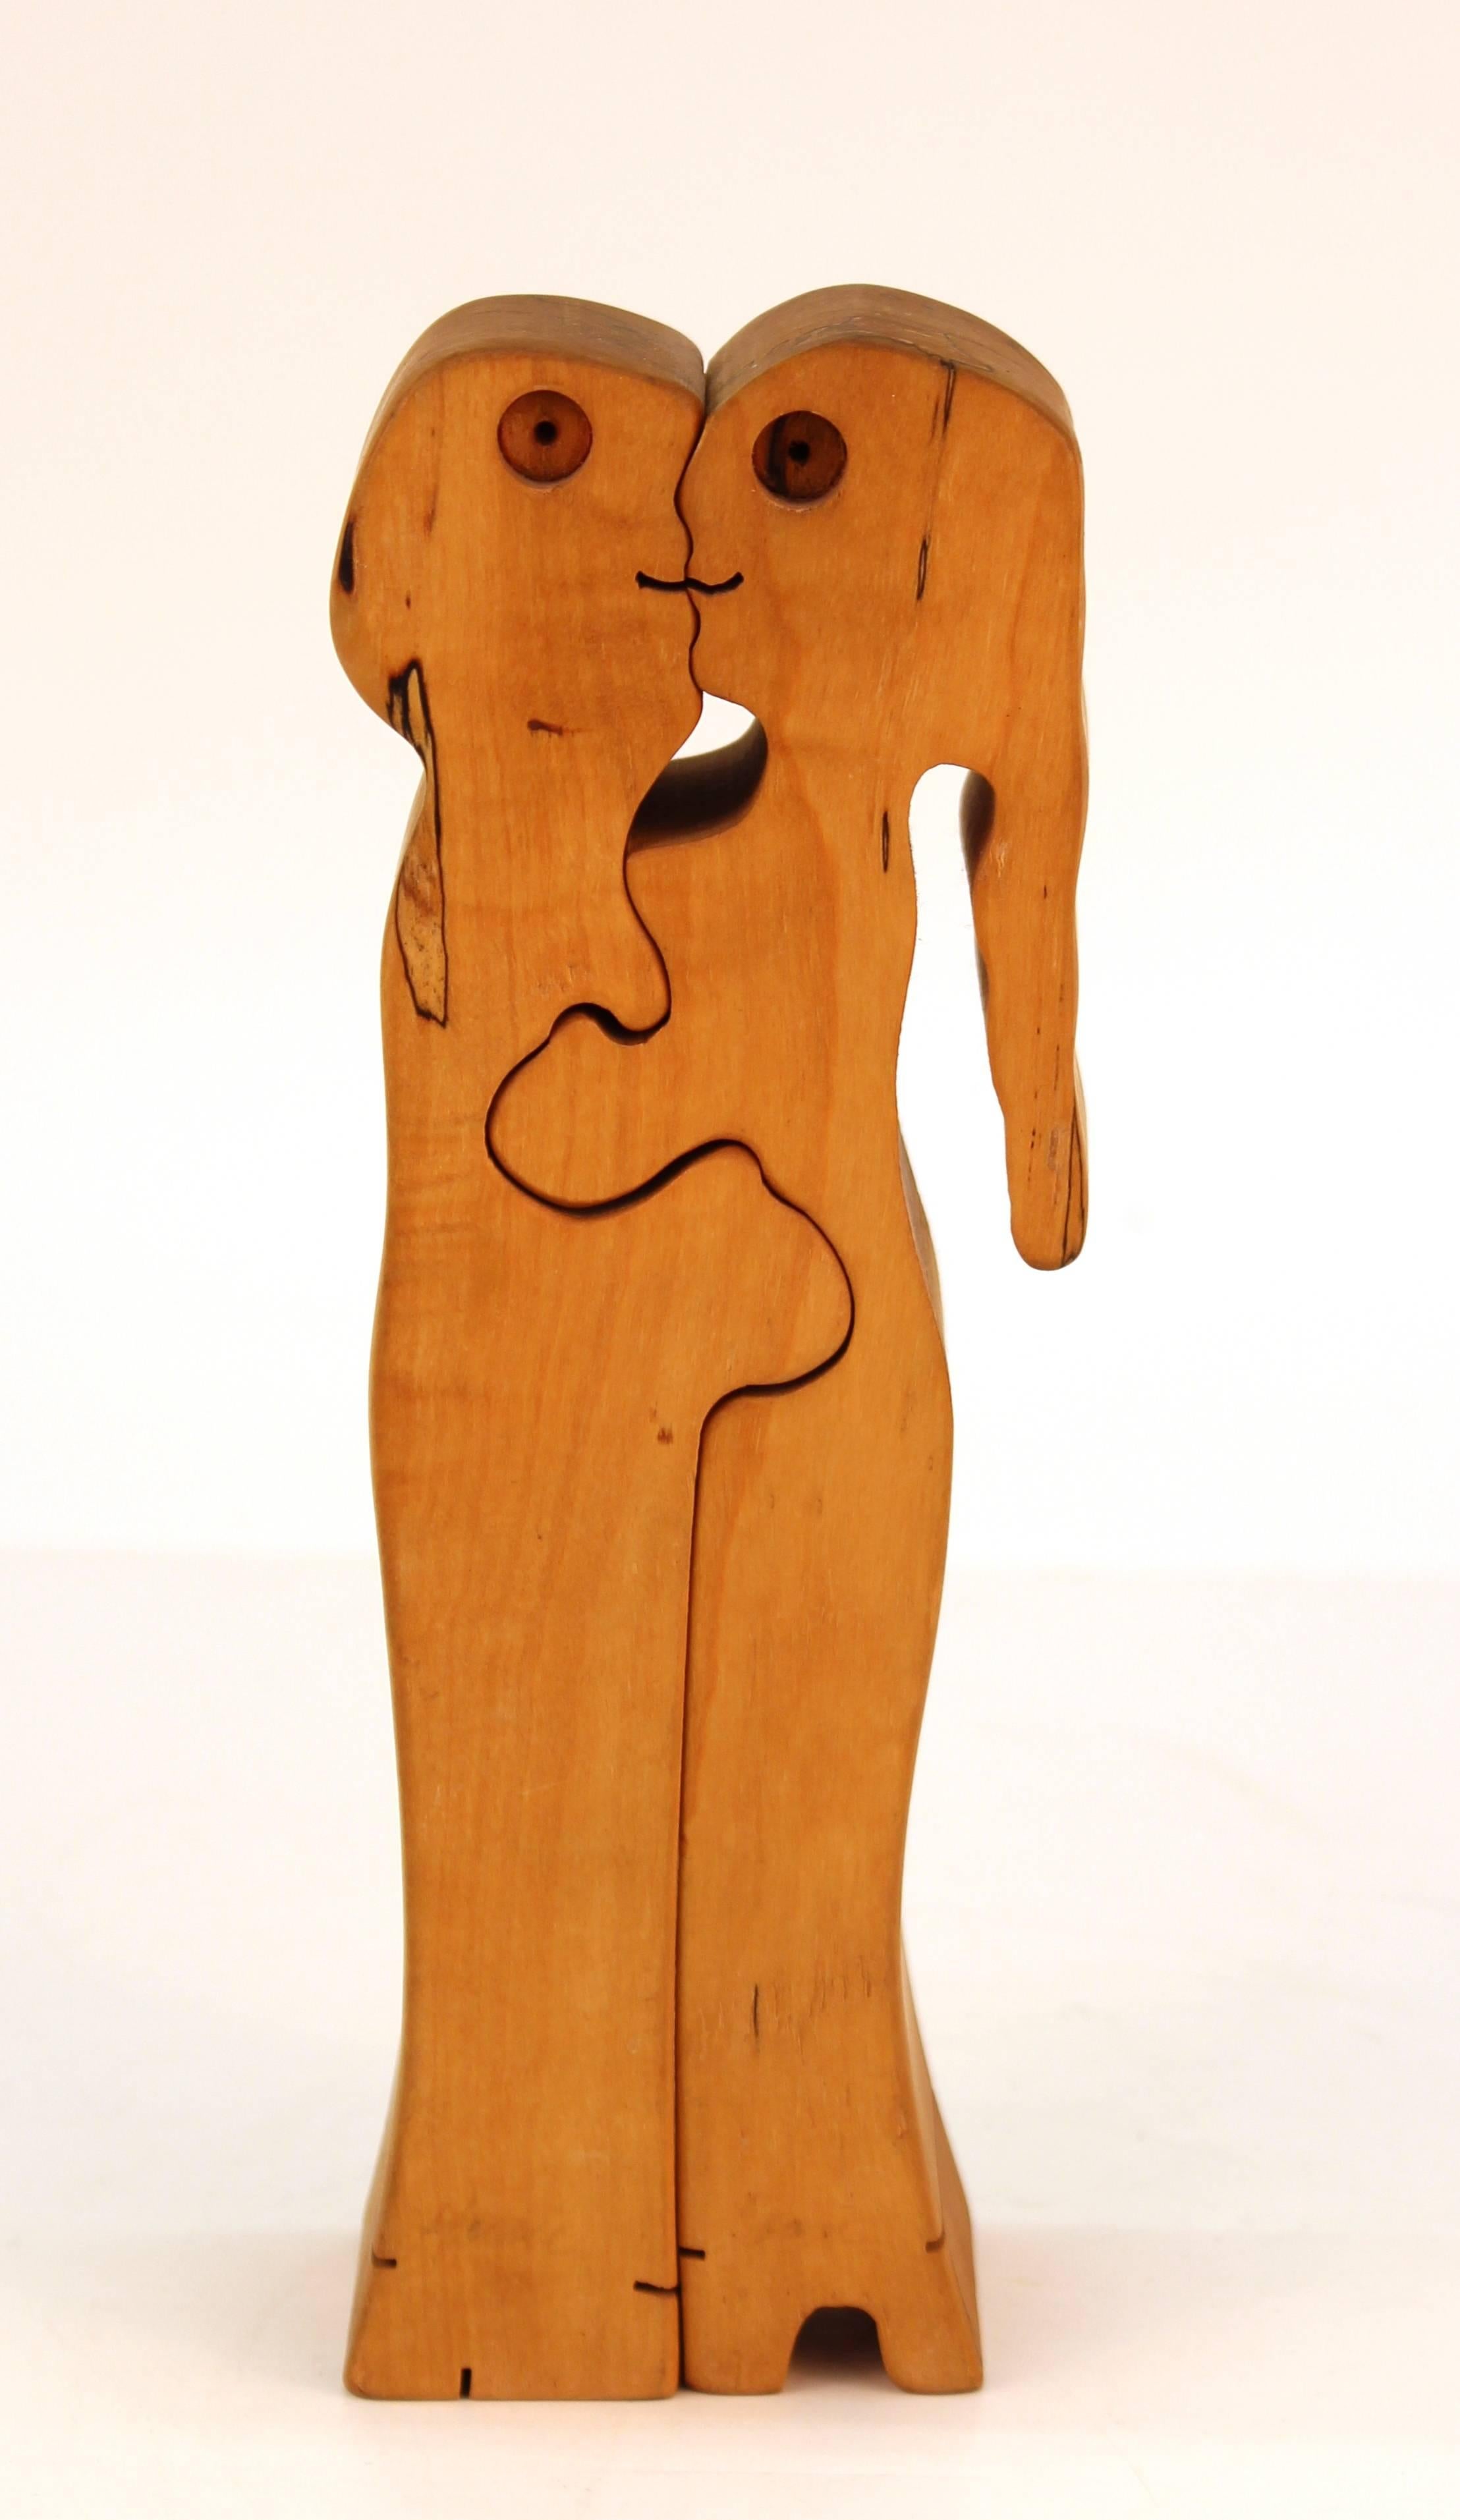 A Mid-Century Modern puzzle sculpture made of carved wood depicting an embracing couple. The two pieces are interlocking and detach. The item was made in the 1970s and is in great vintage condition.